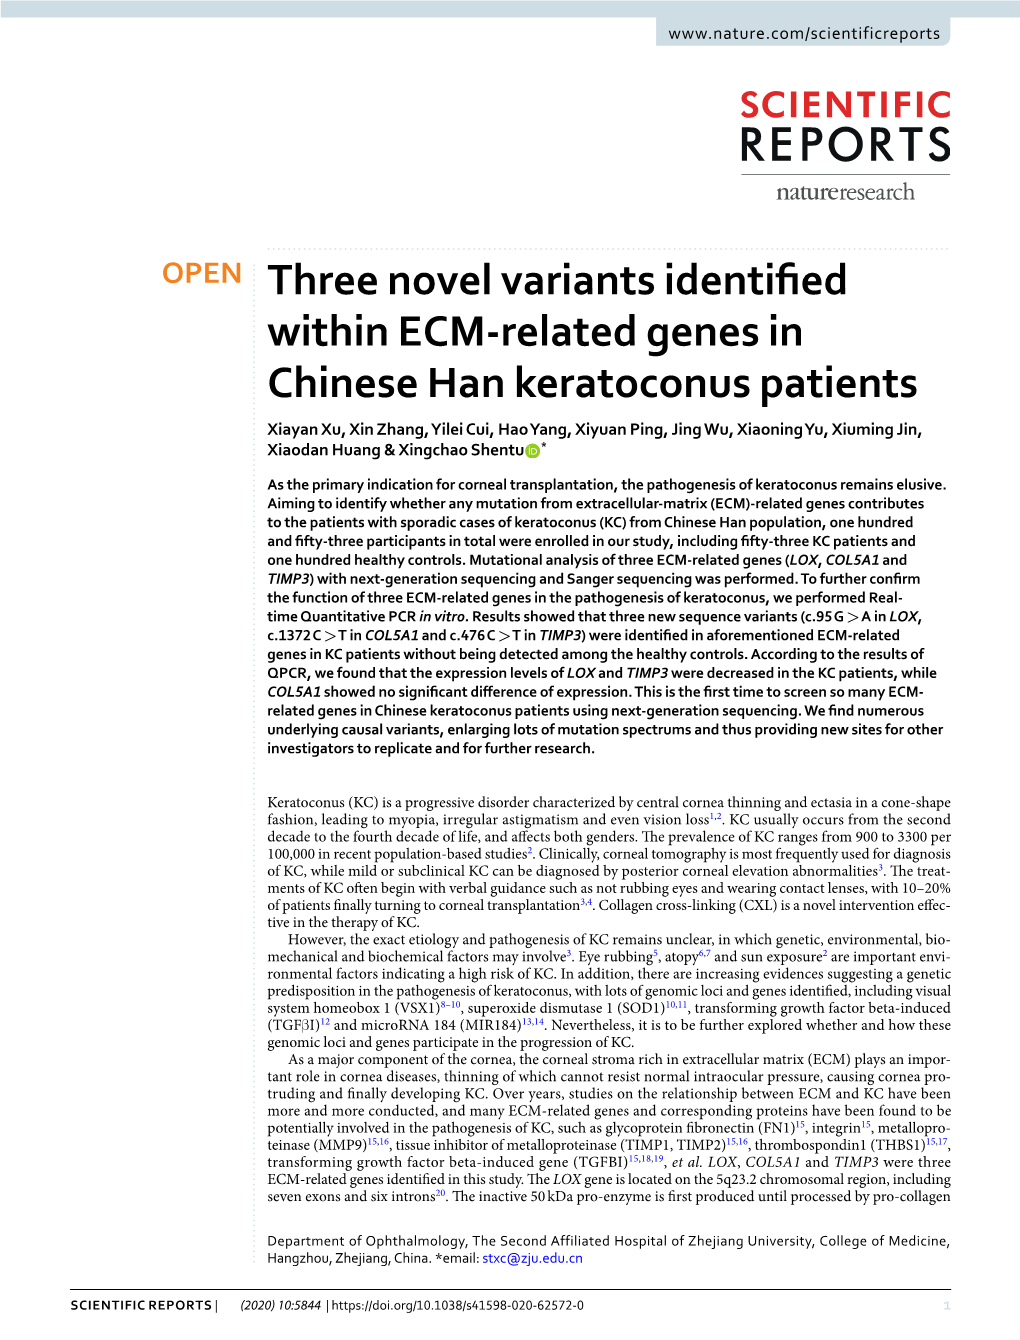 Three Novel Variants Identified Within ECM-Related Genes in Chinese Han Keratoconus Patients